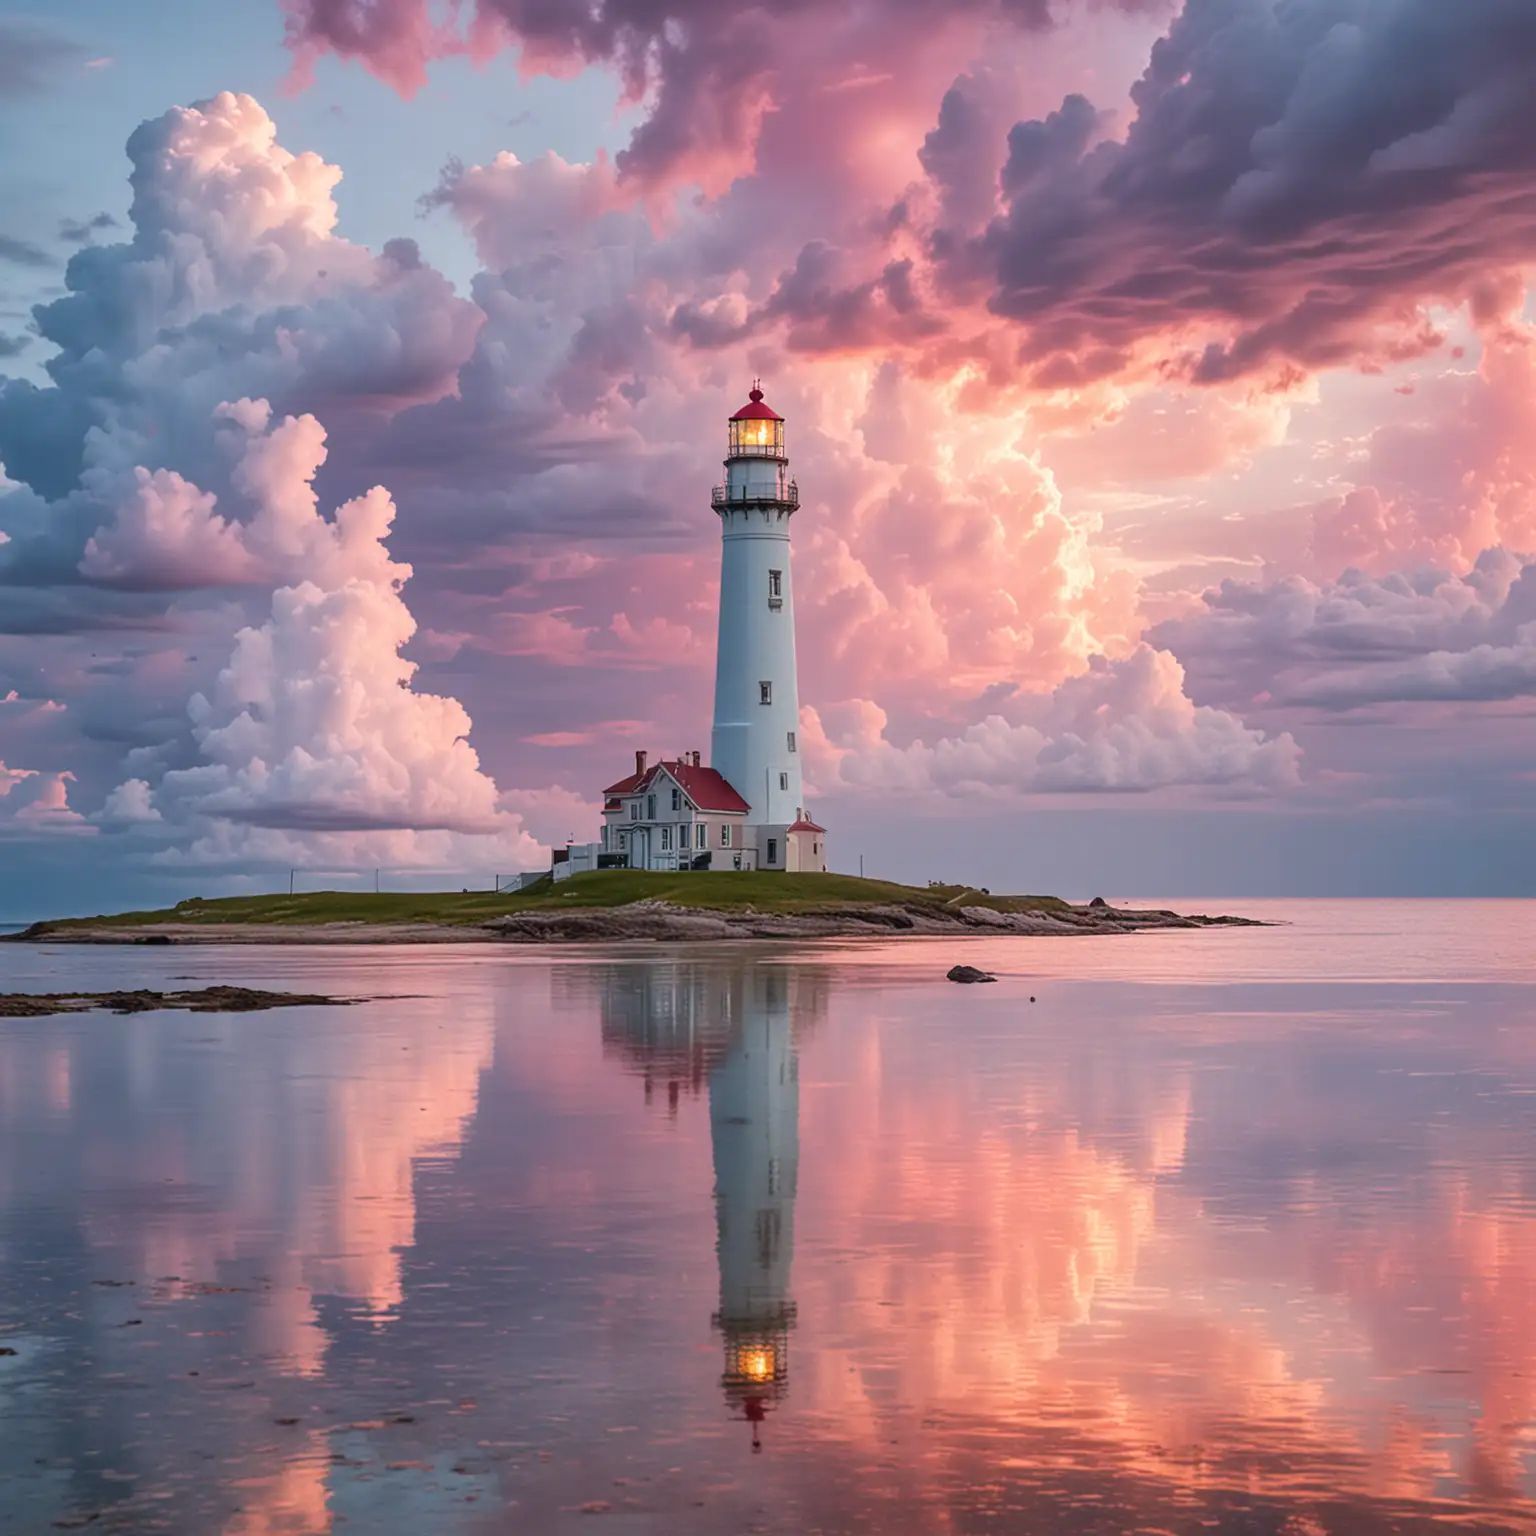 Vibrant pastel colors, large lighthouse in foreground, puffy large colorful clouds reflecting in water,